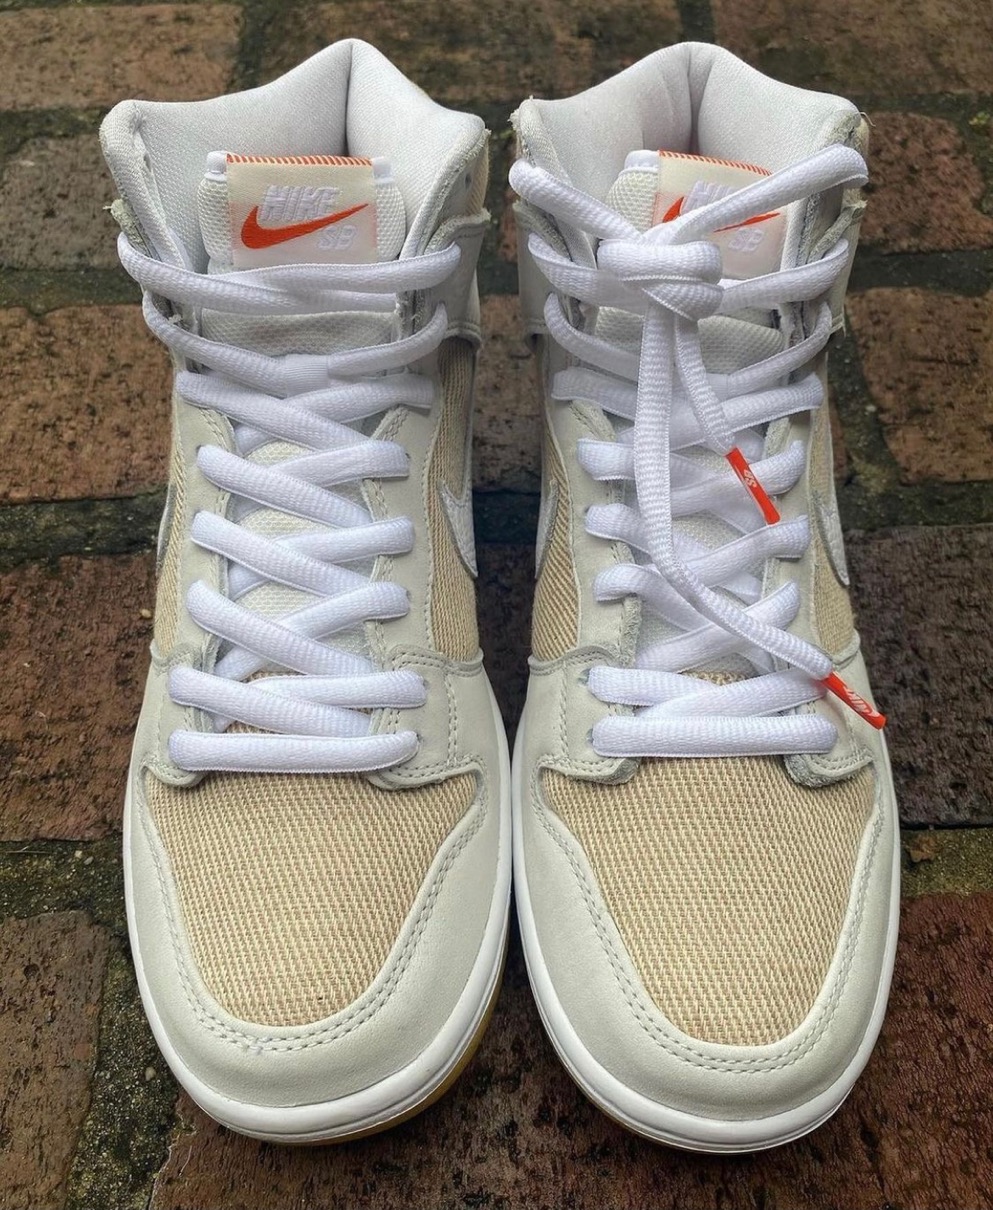 Nike SB】Dunk High Pro ISO “Unbleached Pack” Sailが国内9月4日に ...